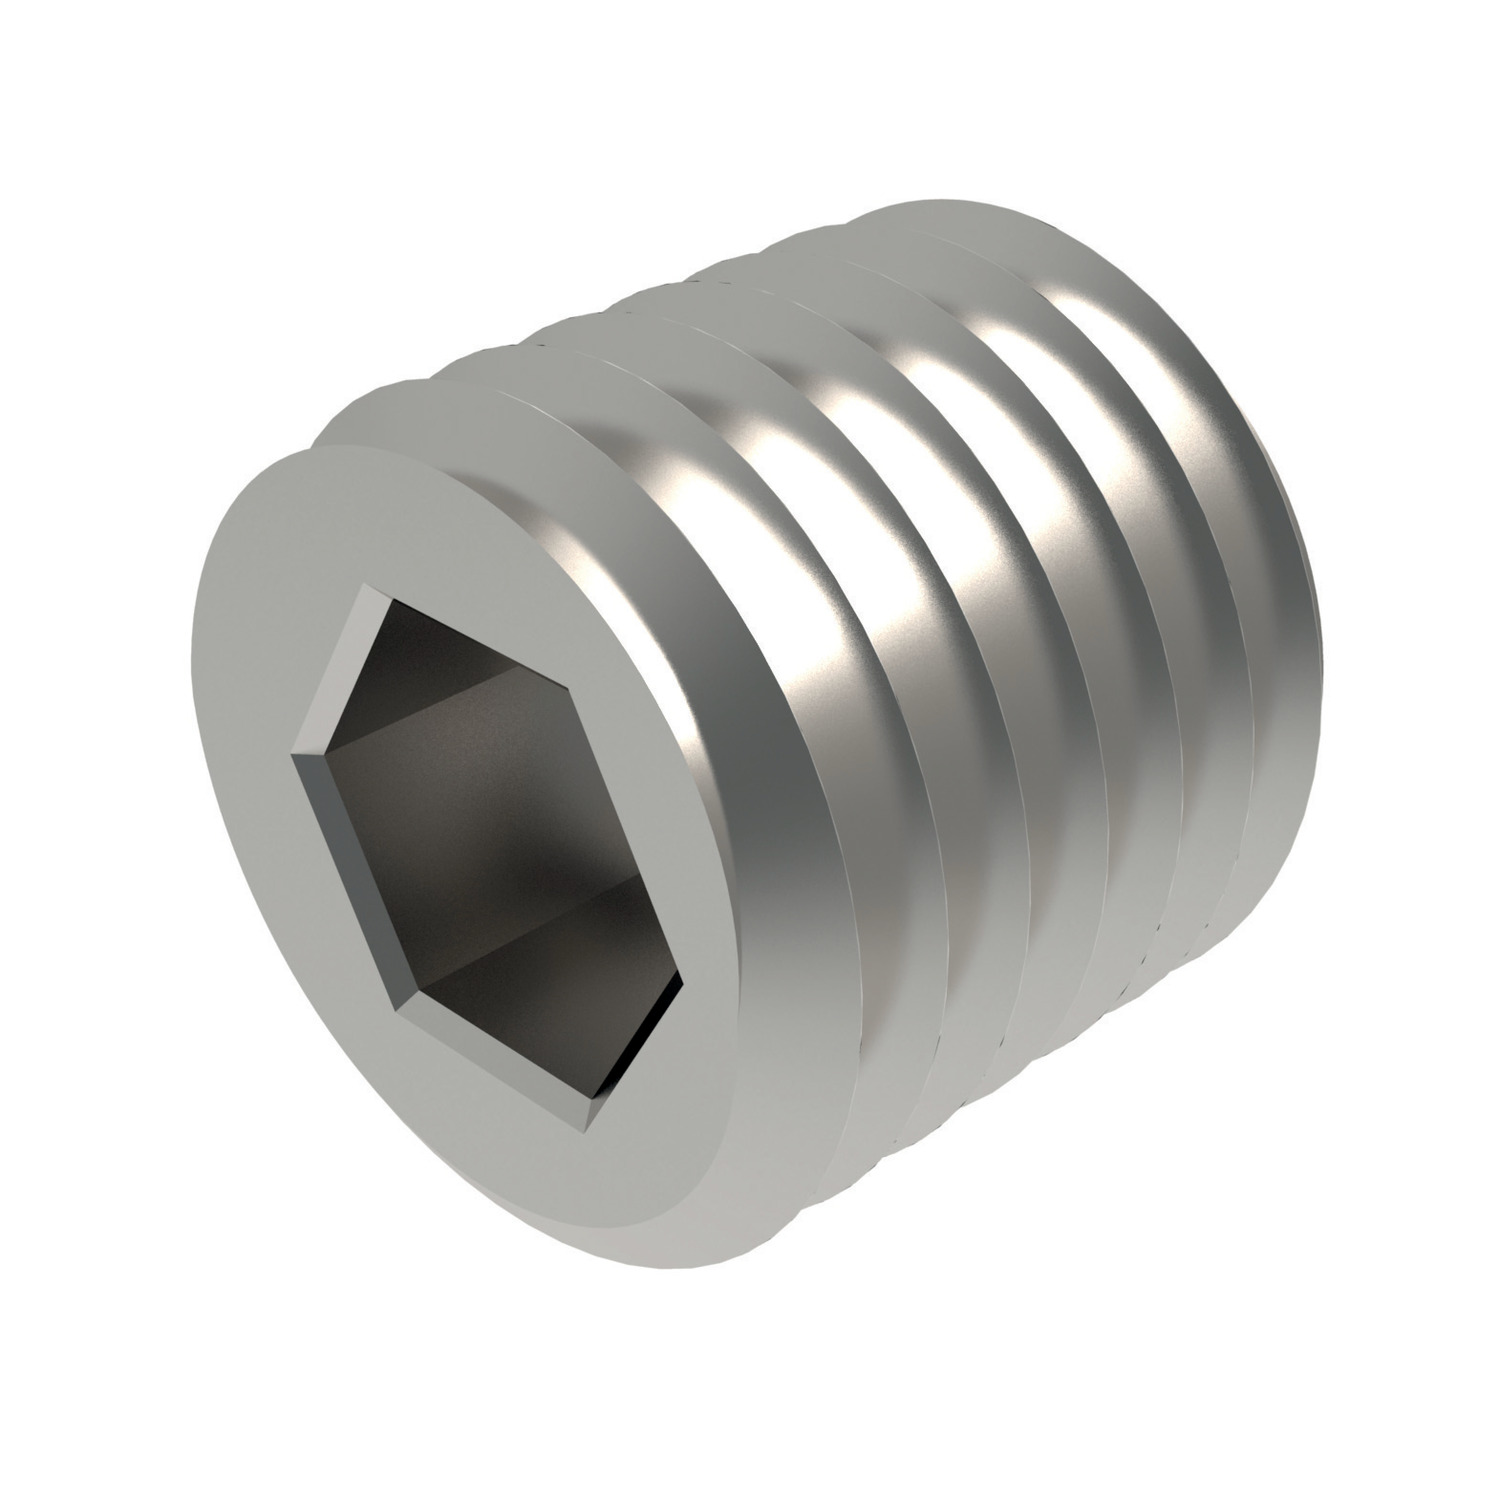 P0199.060-010-A2 Threaded Restrictor M6x1, 1.02 orifice A2 stainless steel. DANGER: Ensure this part is installed according to instructions in the product data sheet and installation notes. Holes must be completely free of oil, grease and debris.